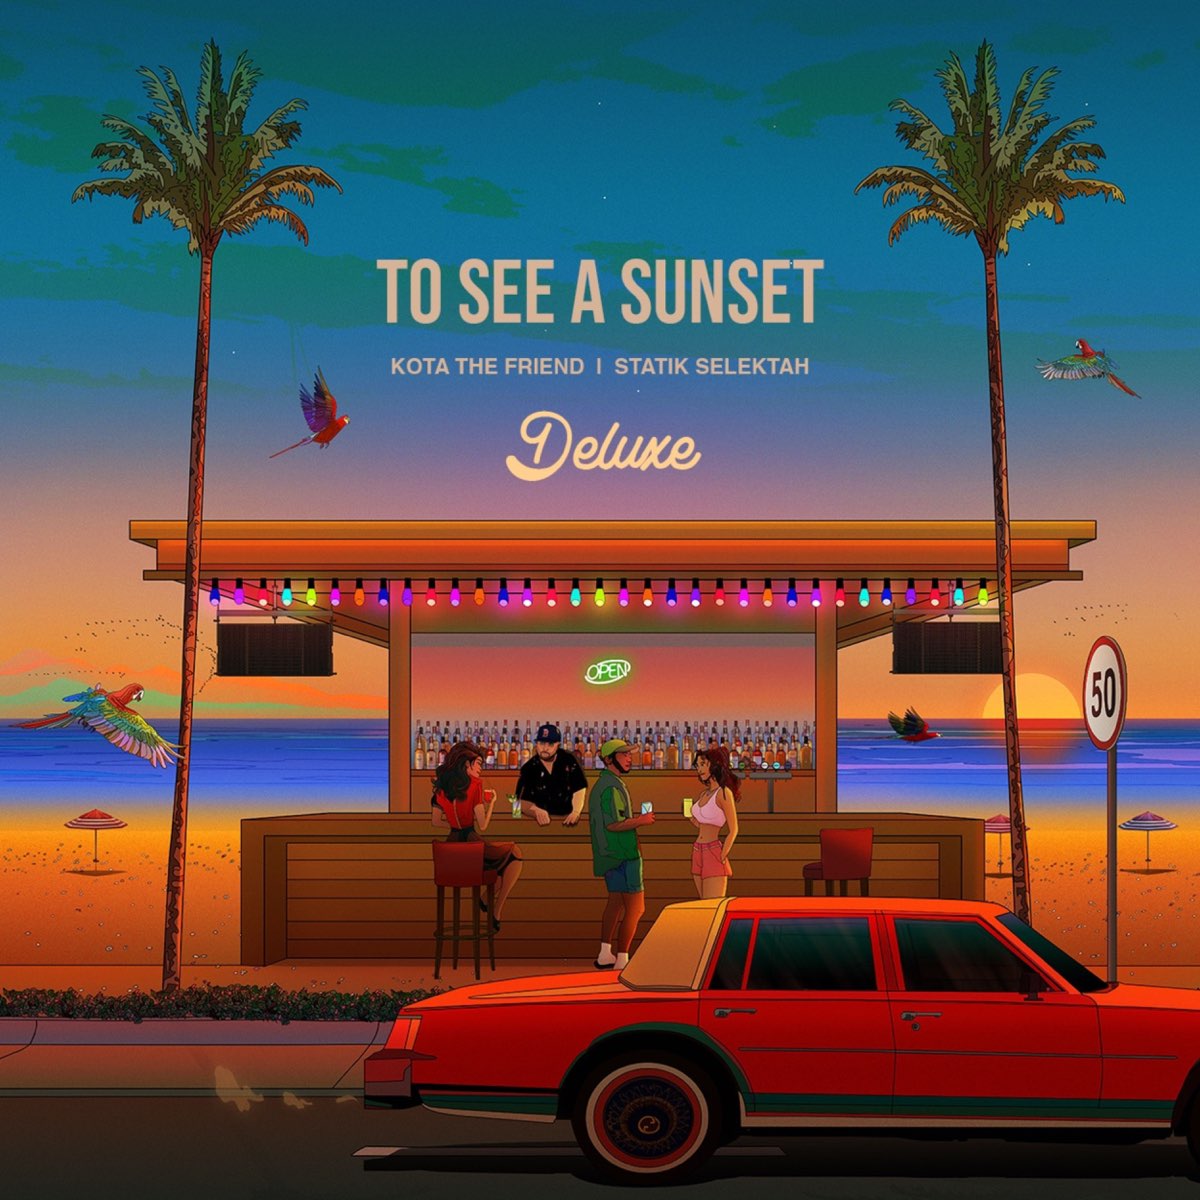 To See a Sunset (Deluxe) by Kota the Friend & Statik Selektah on Apple Music